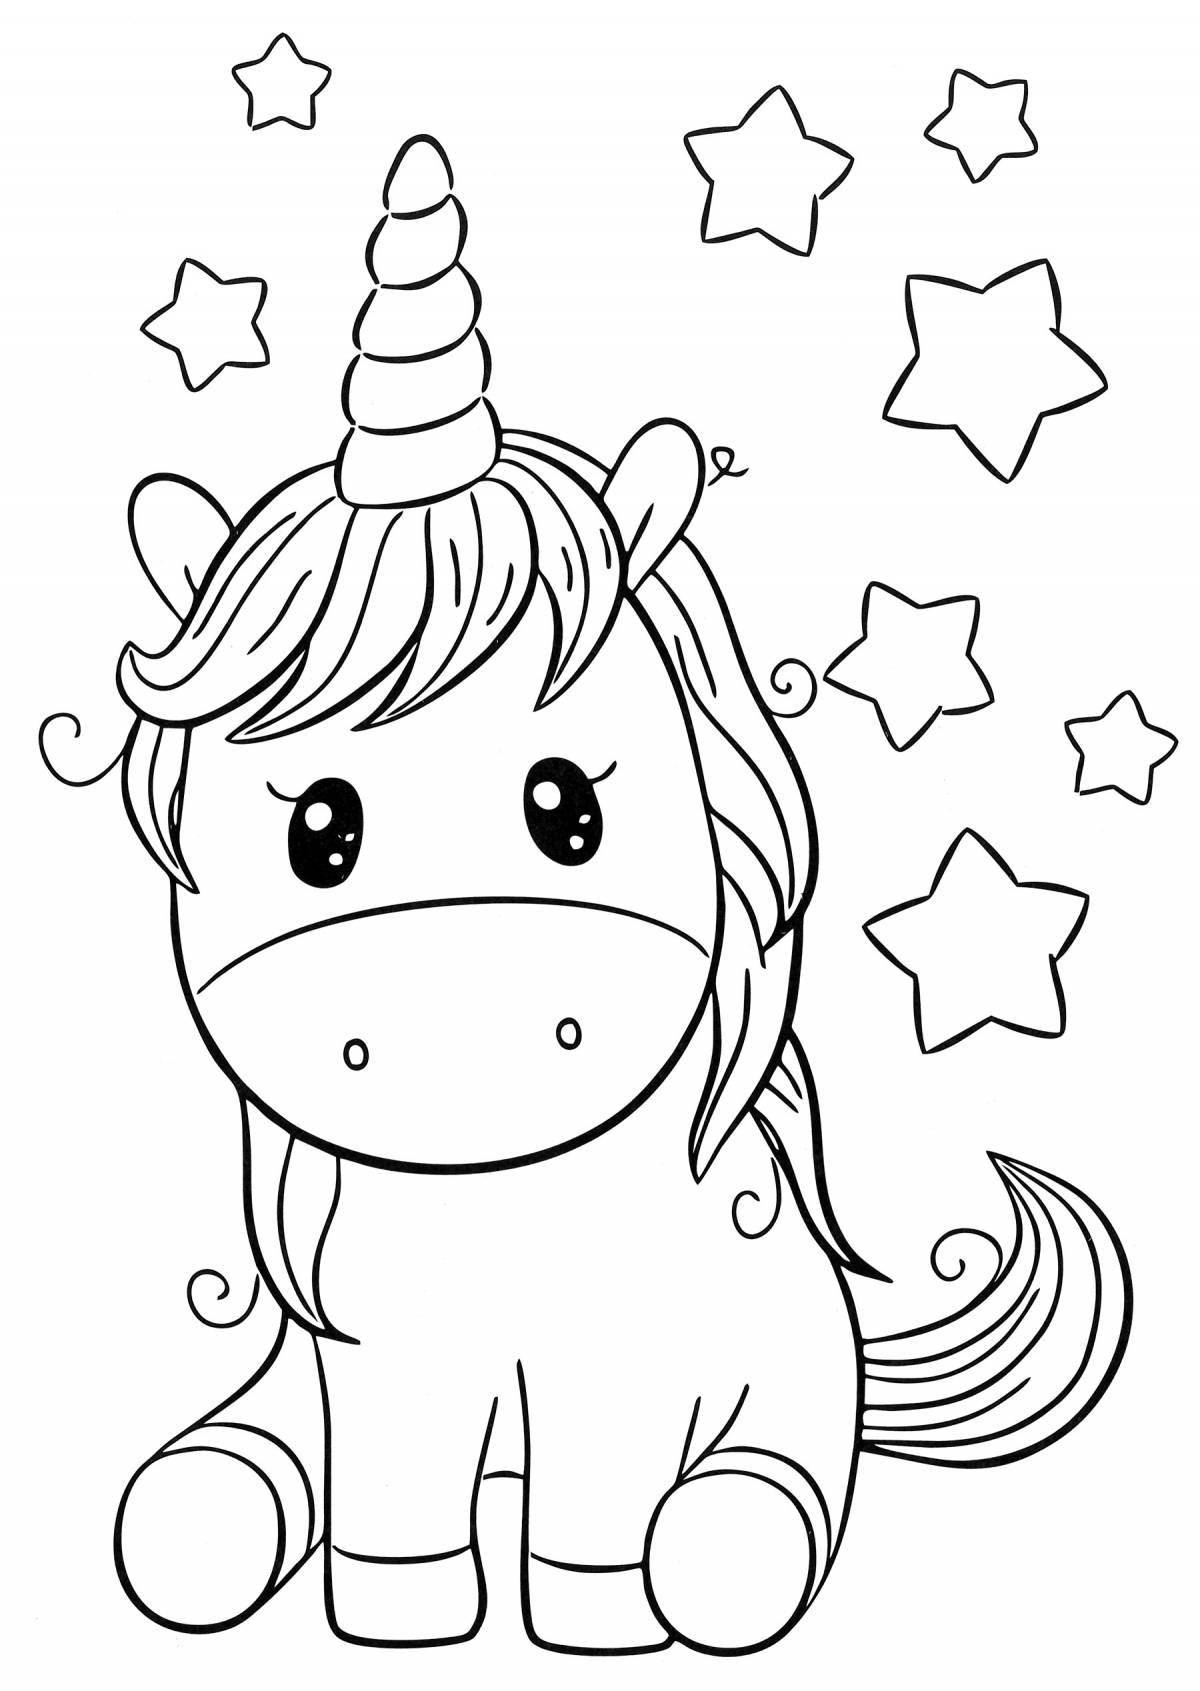 Excellent coloring drawing of a unicorn